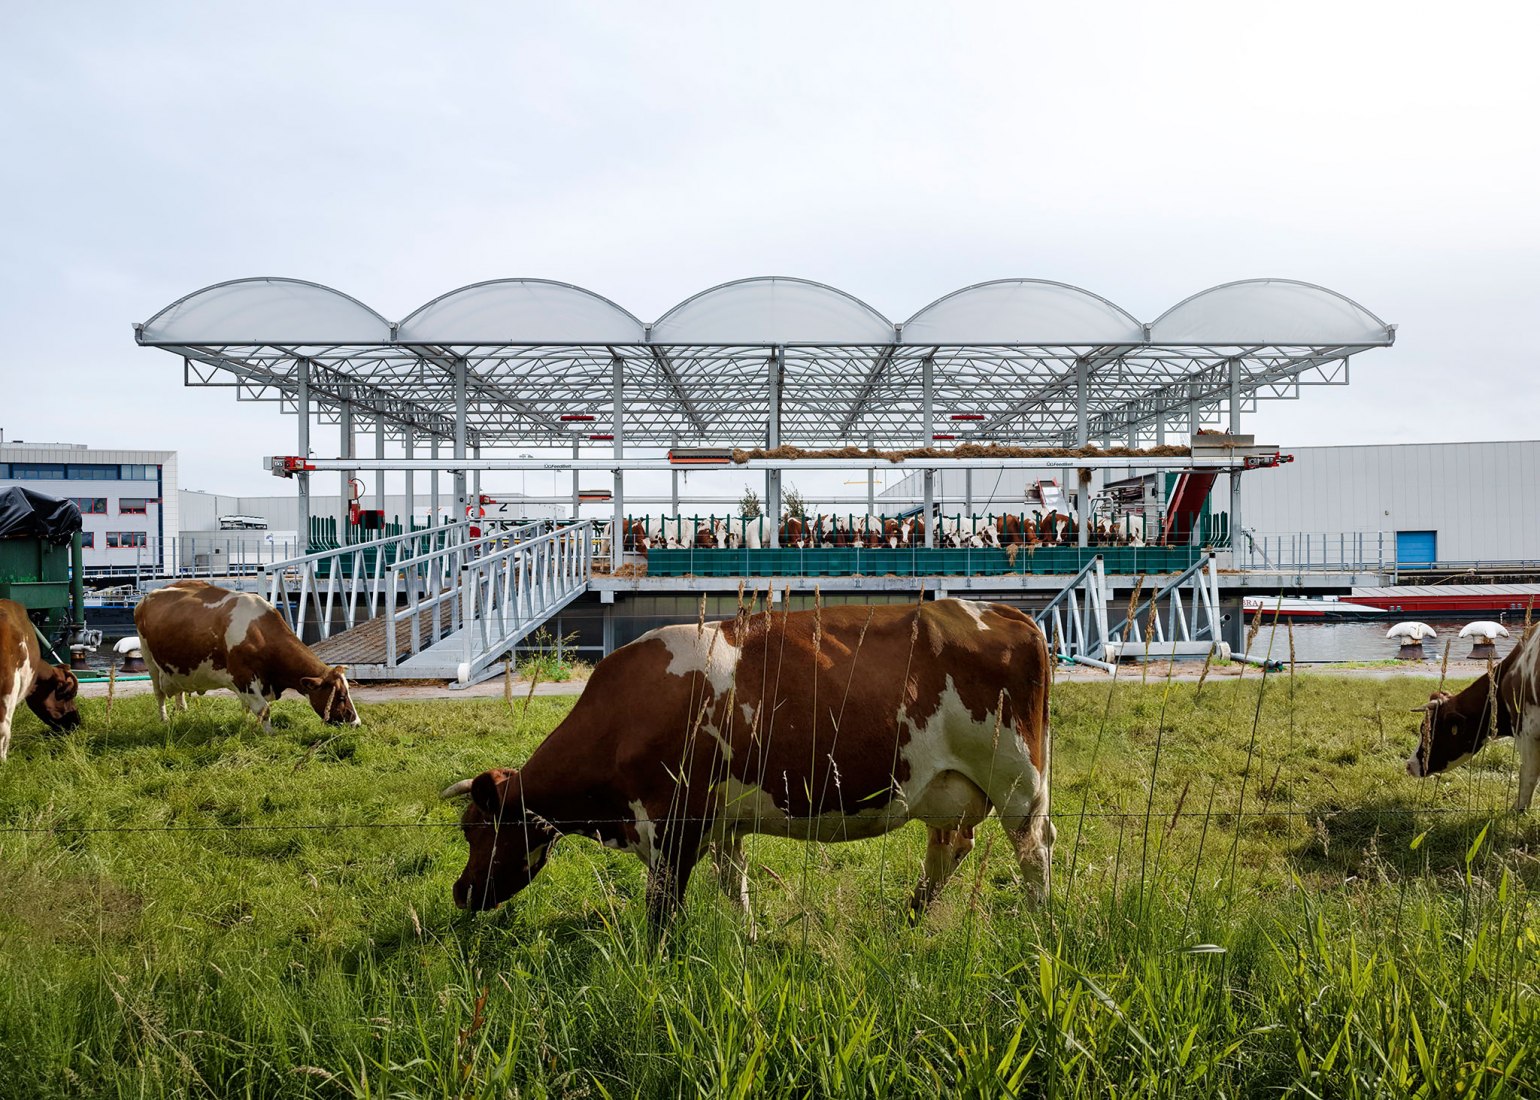 Floating Farm Dairy by Goldsmith Company. Photograph by Rubén Dario Kleimeer.